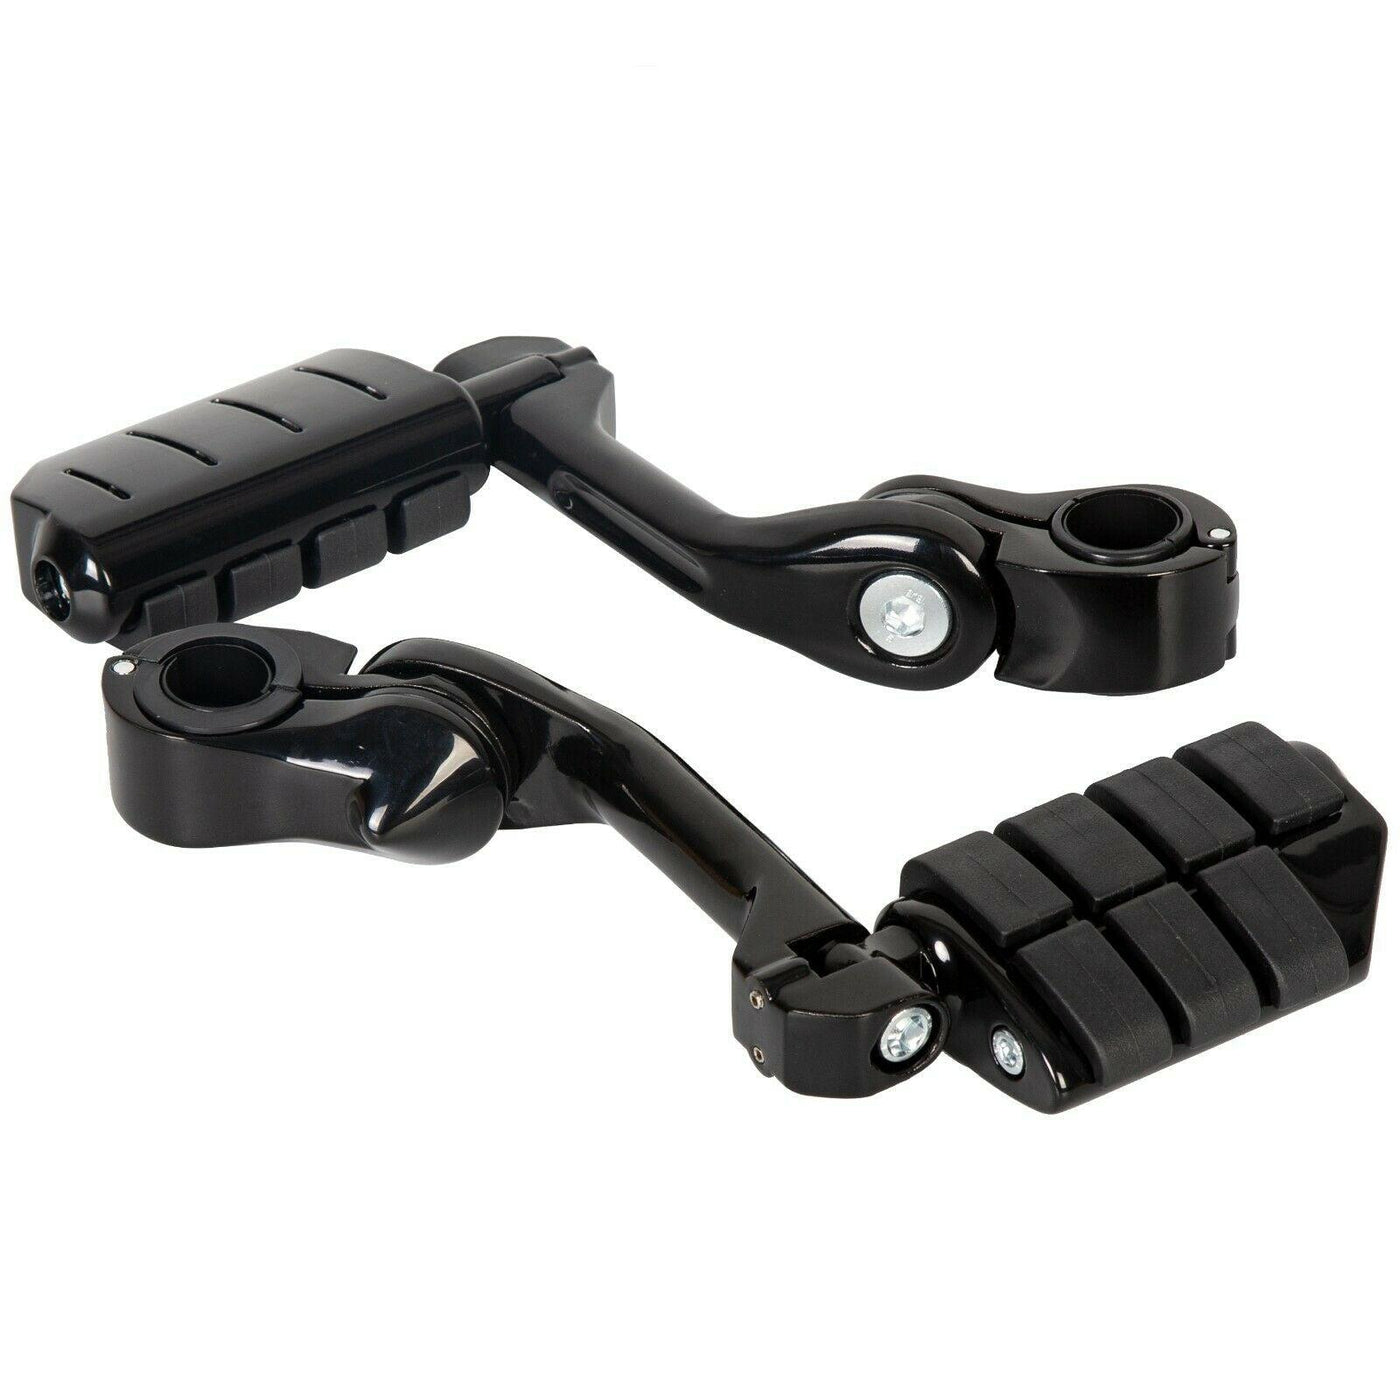 BLK Motorcycle Long Angled Foot Highway Pegs For Harley 1-1/4" Engine Guard - Moto Life Products